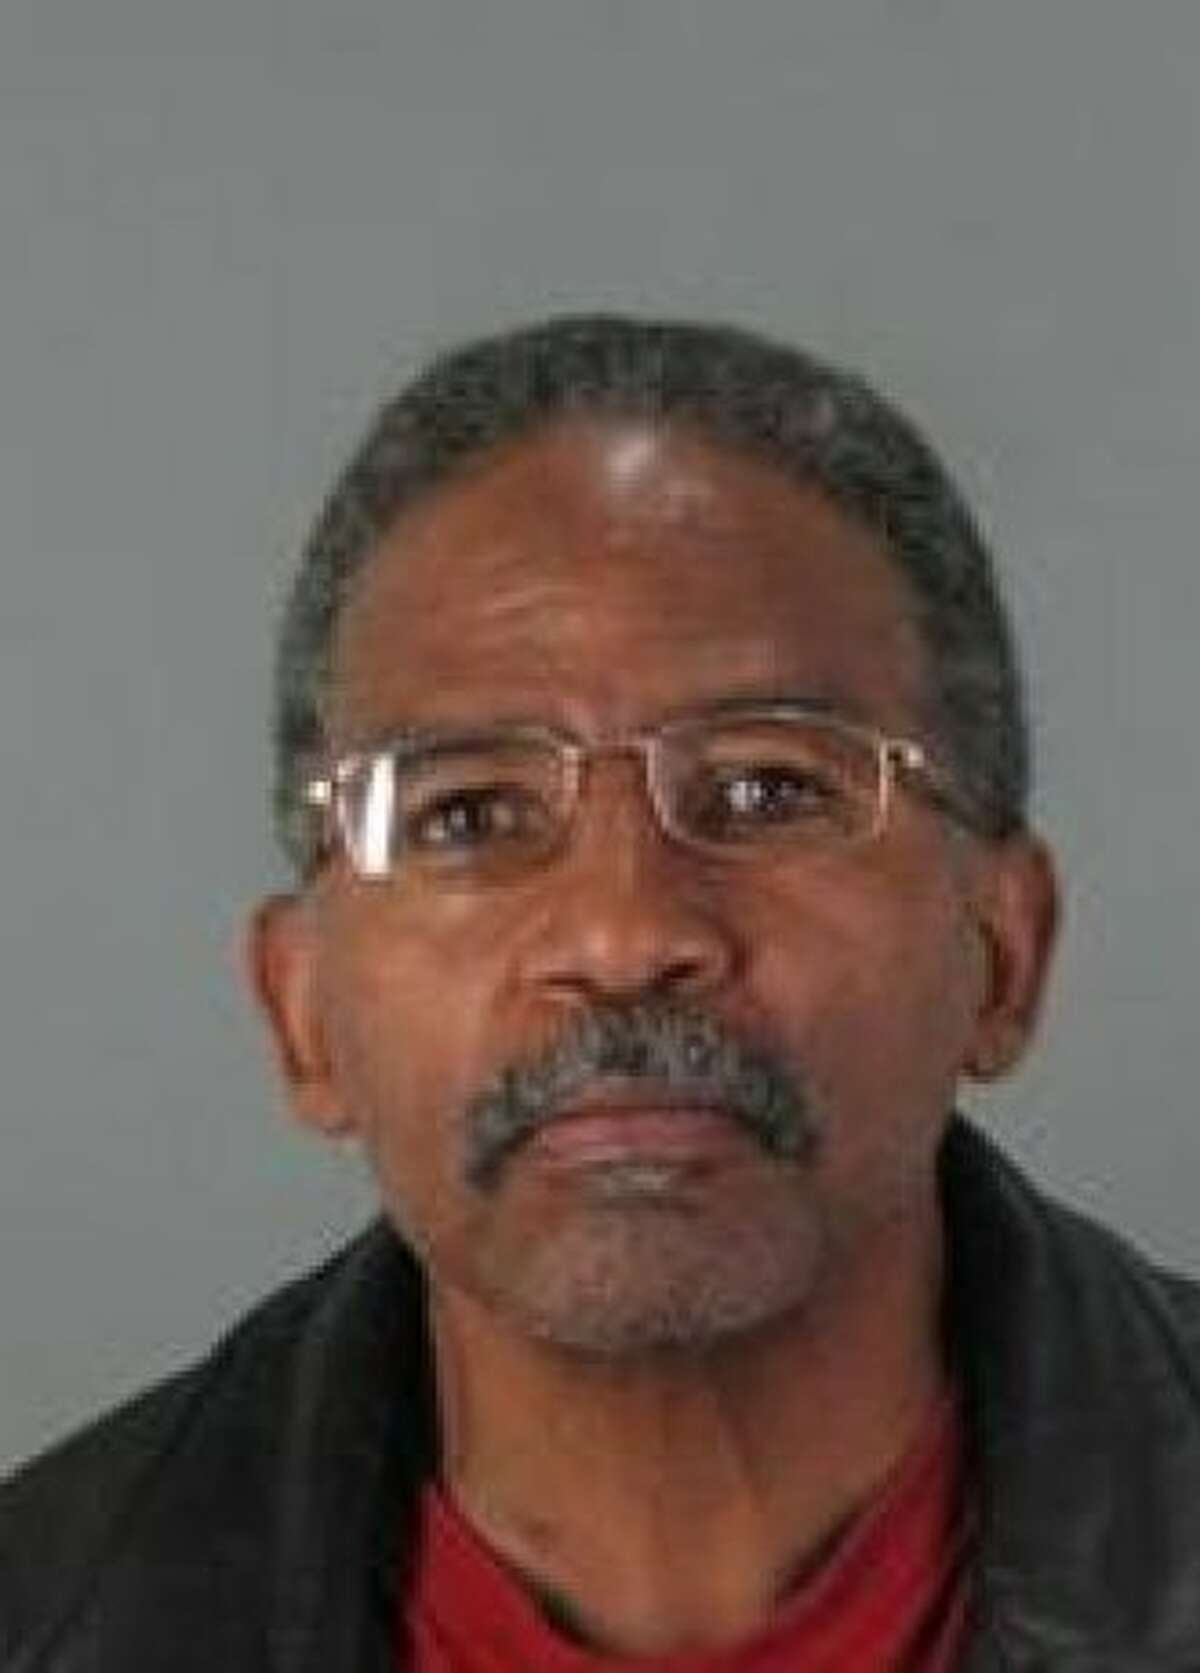 Gregory Leon Elarms, 58, of Pittsburg, suspected in the killing of David Lewis.